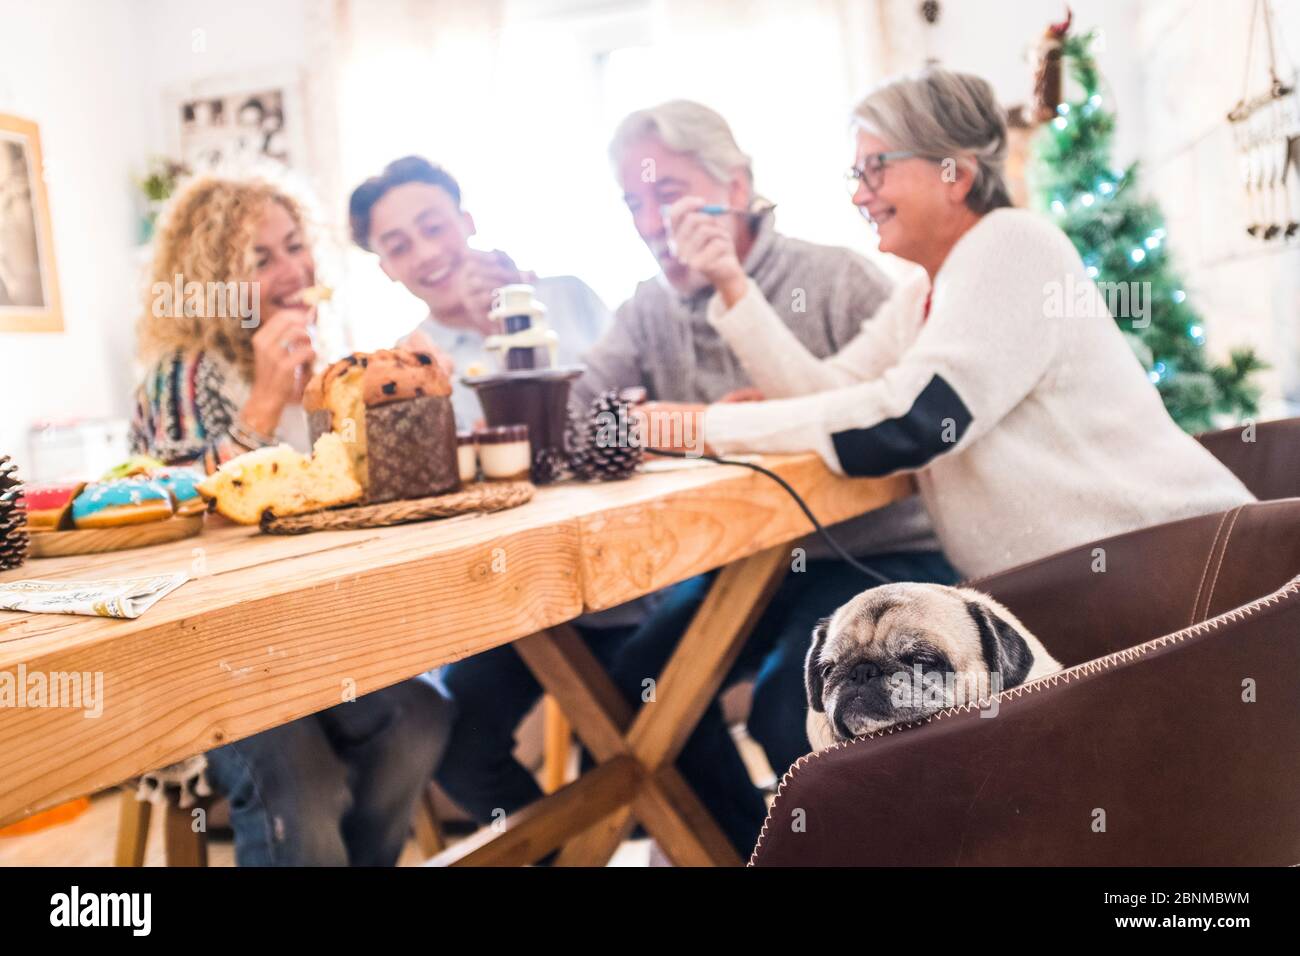 A group of people of mixed ages happily sit together at a table at Christmas time, lazy dog in the foreground Stock Photo